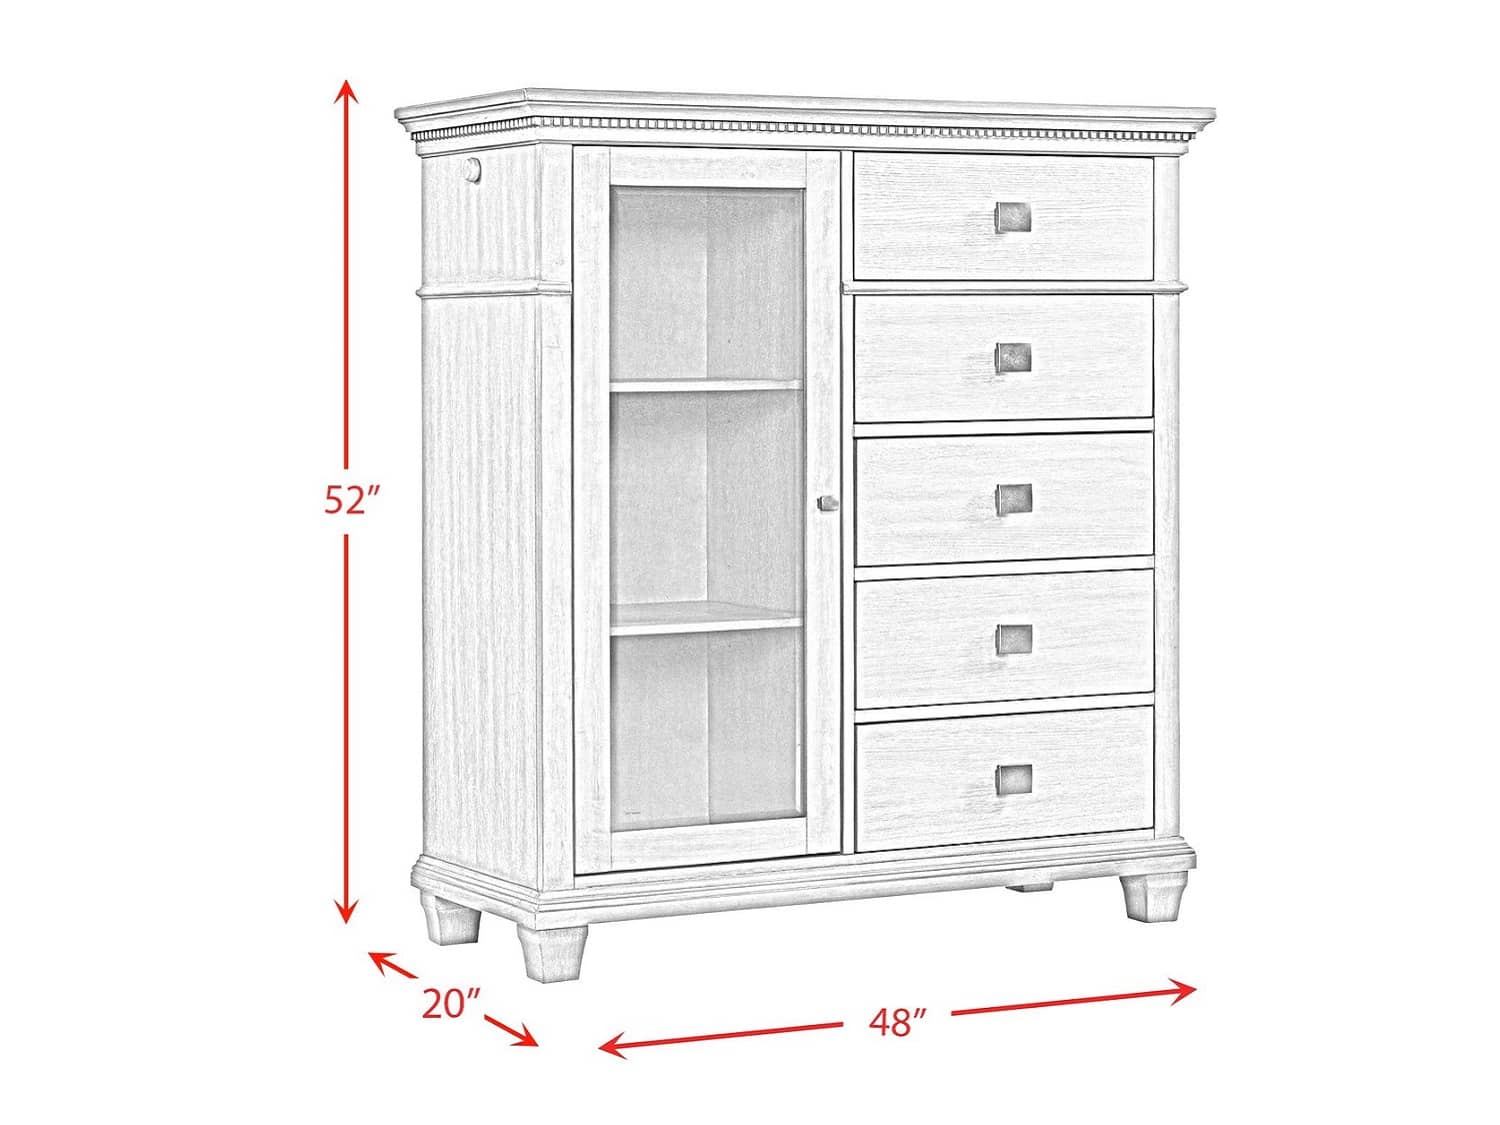 DANFORD Chest of Drawers - Dimensions